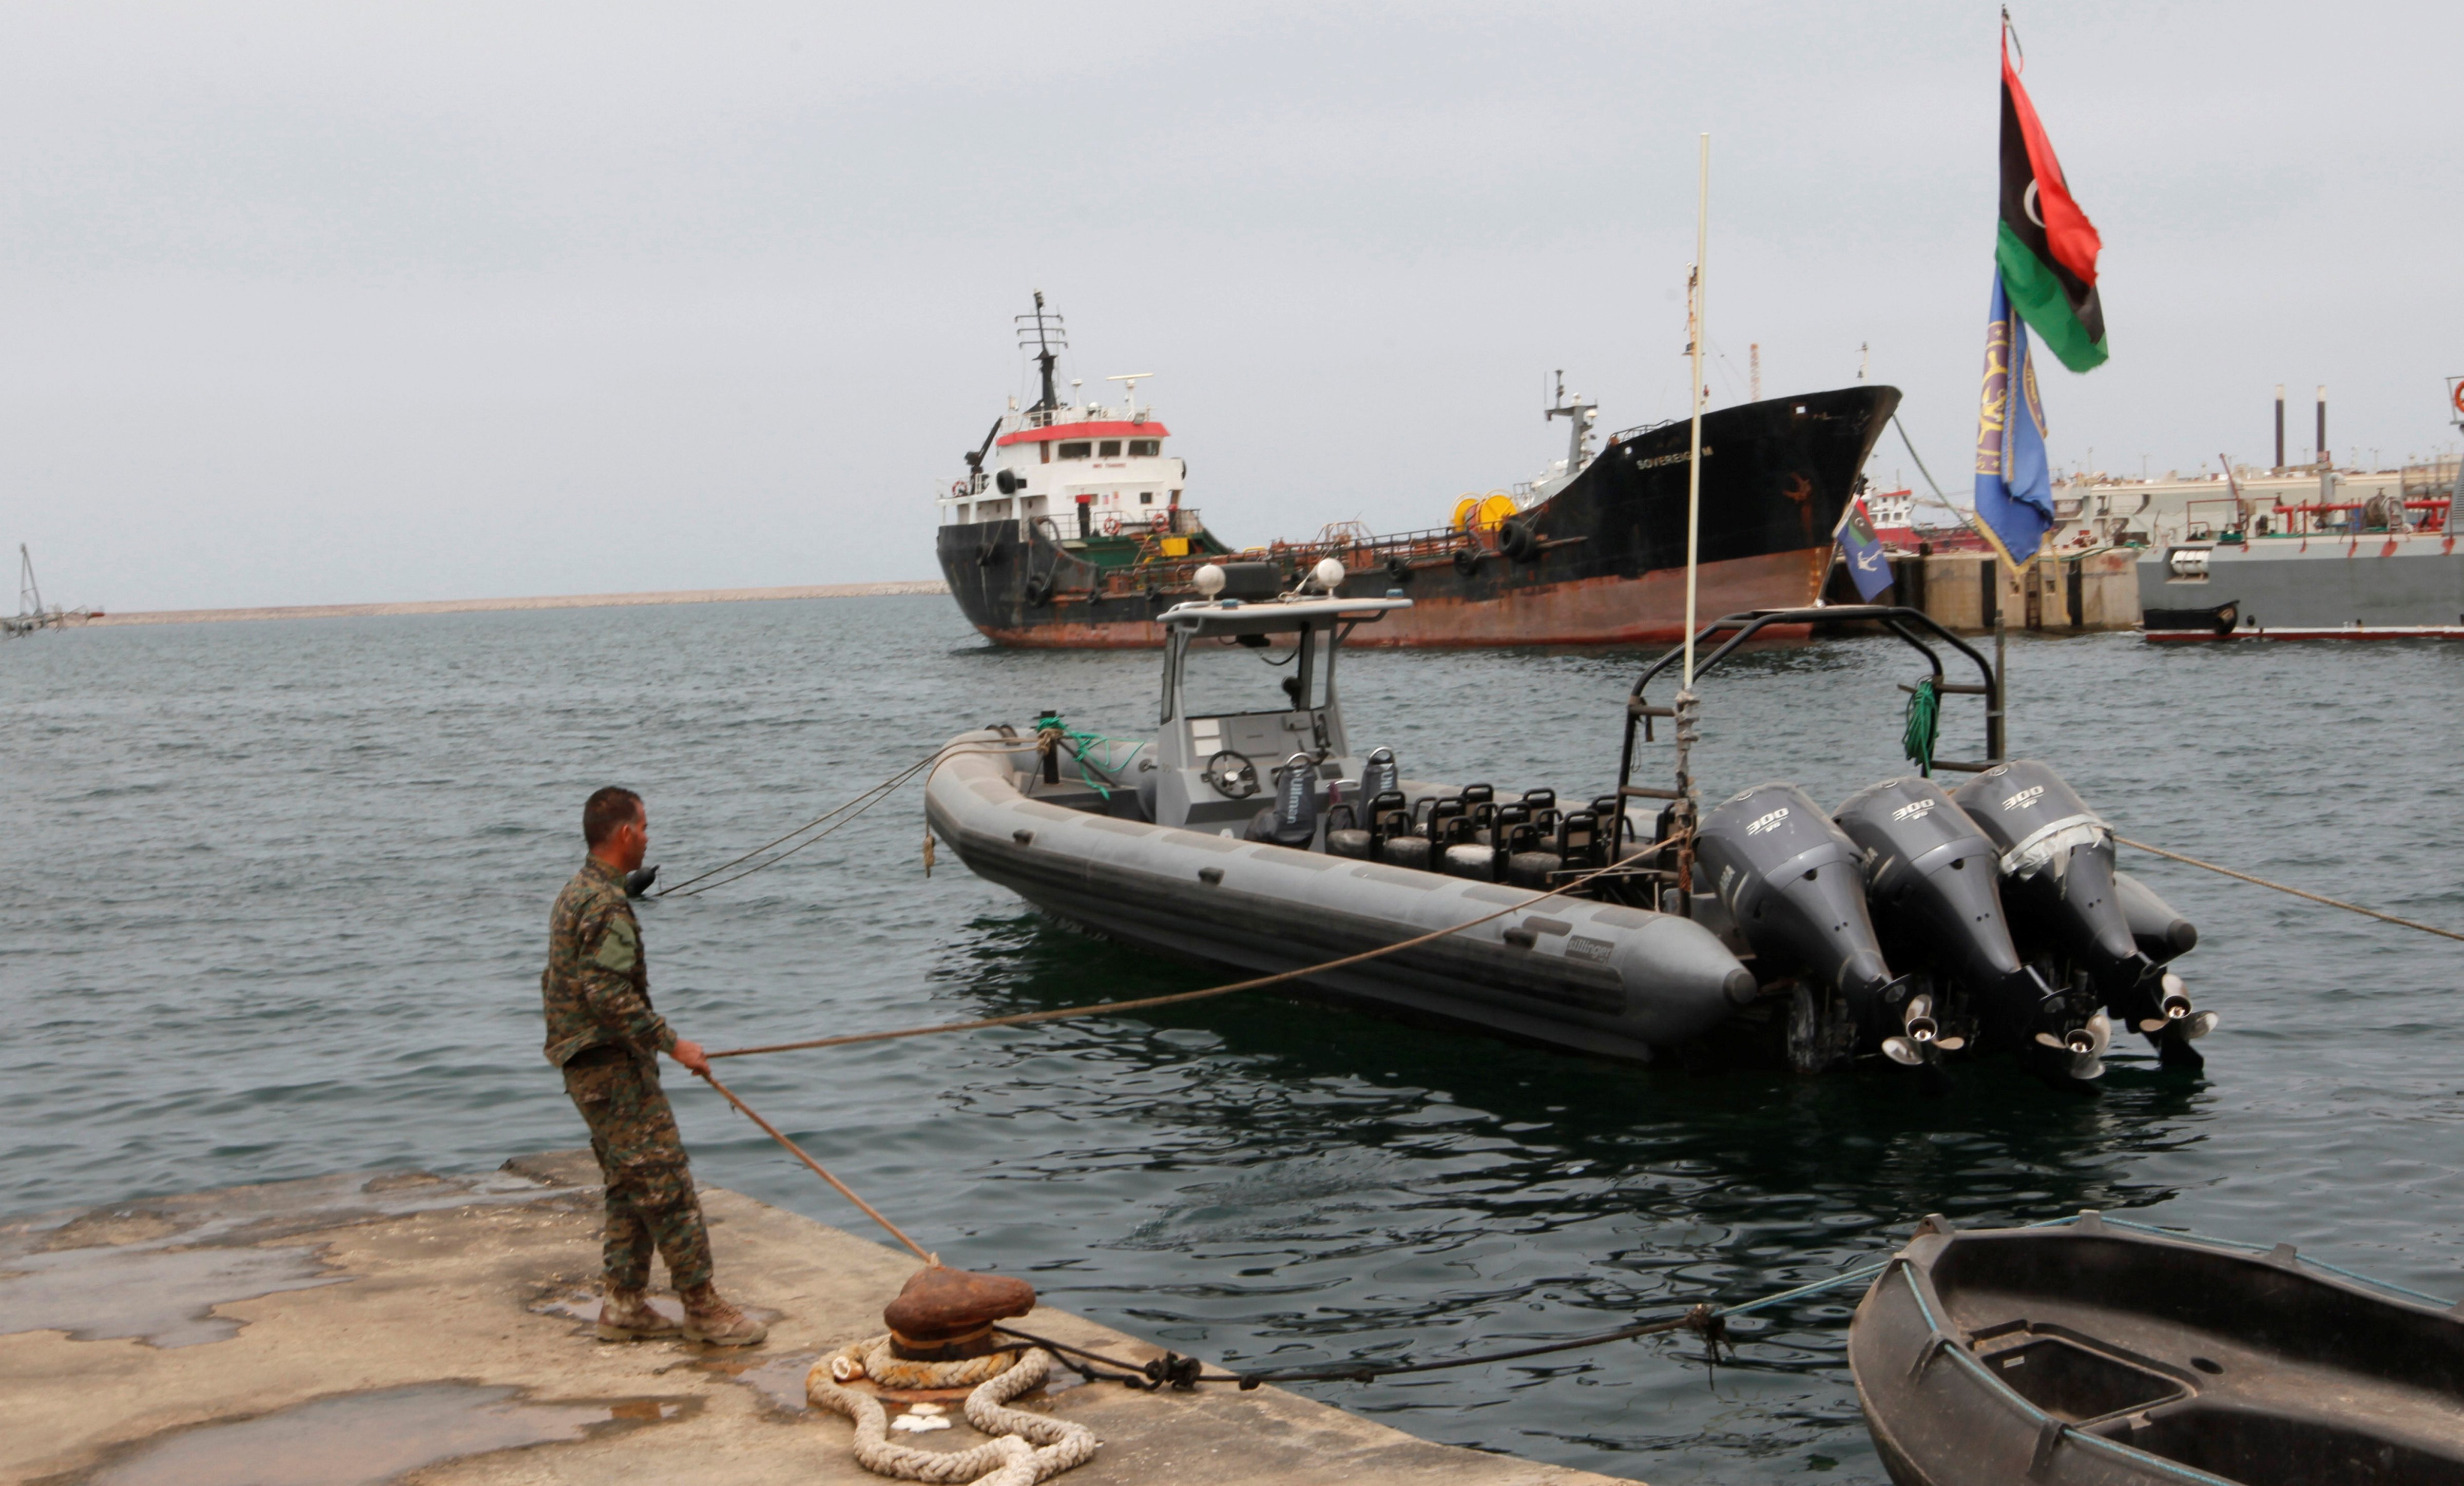 A member of the Libyan coast guard conducts a daily routine check on one of the patrol boats in Tripoli, Libya, on April 19, 2016 (Ismail Zetouni—Reuters)